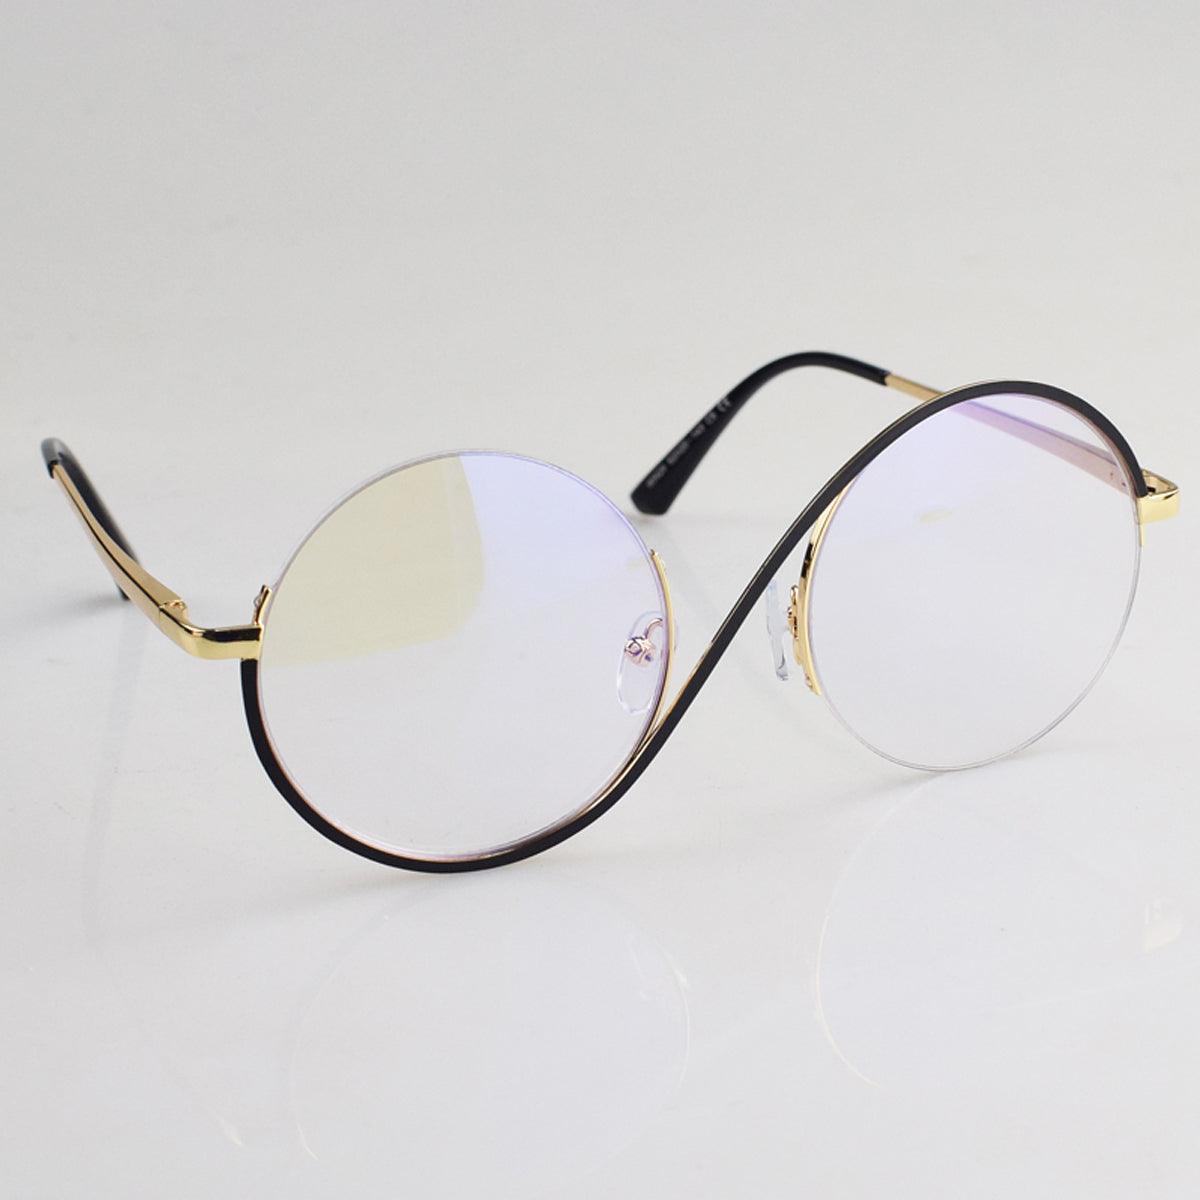 S Frame Curved Round Glasses • Aesthetic Clothes Shop